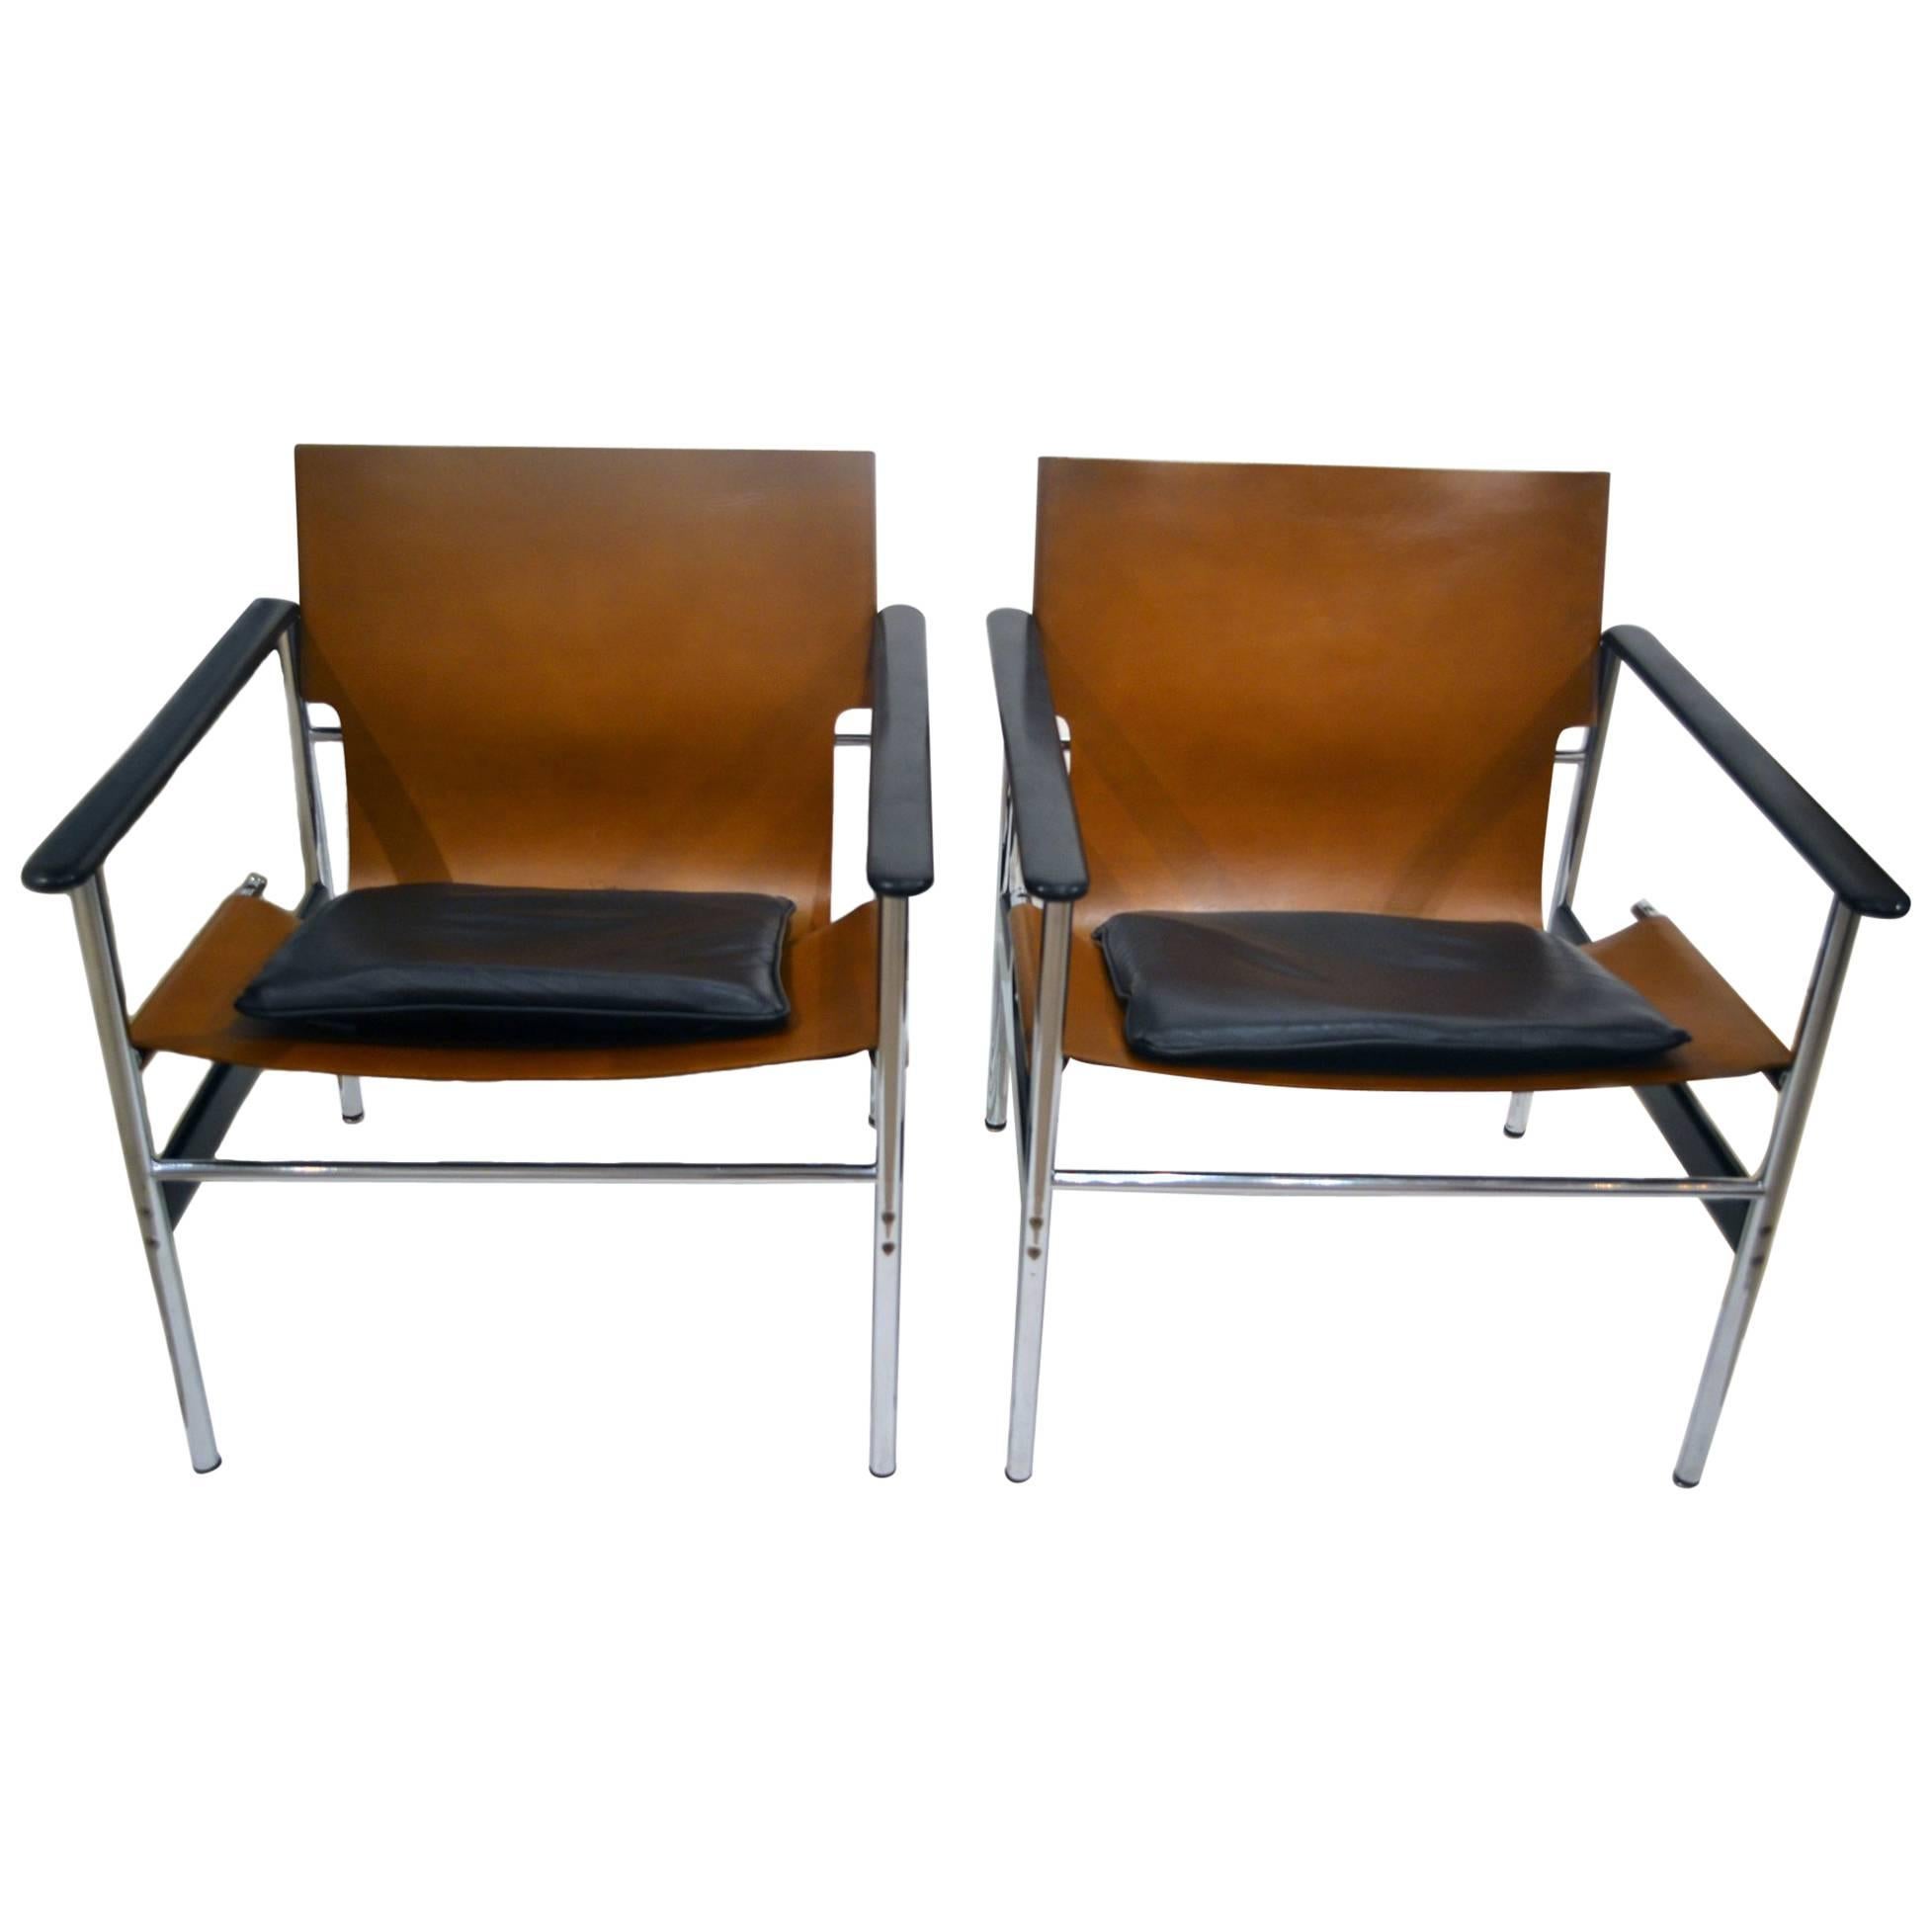 Vintage Charles Pollock Leather, Steel and Chrome Chairs for Knoll, circa 1960s